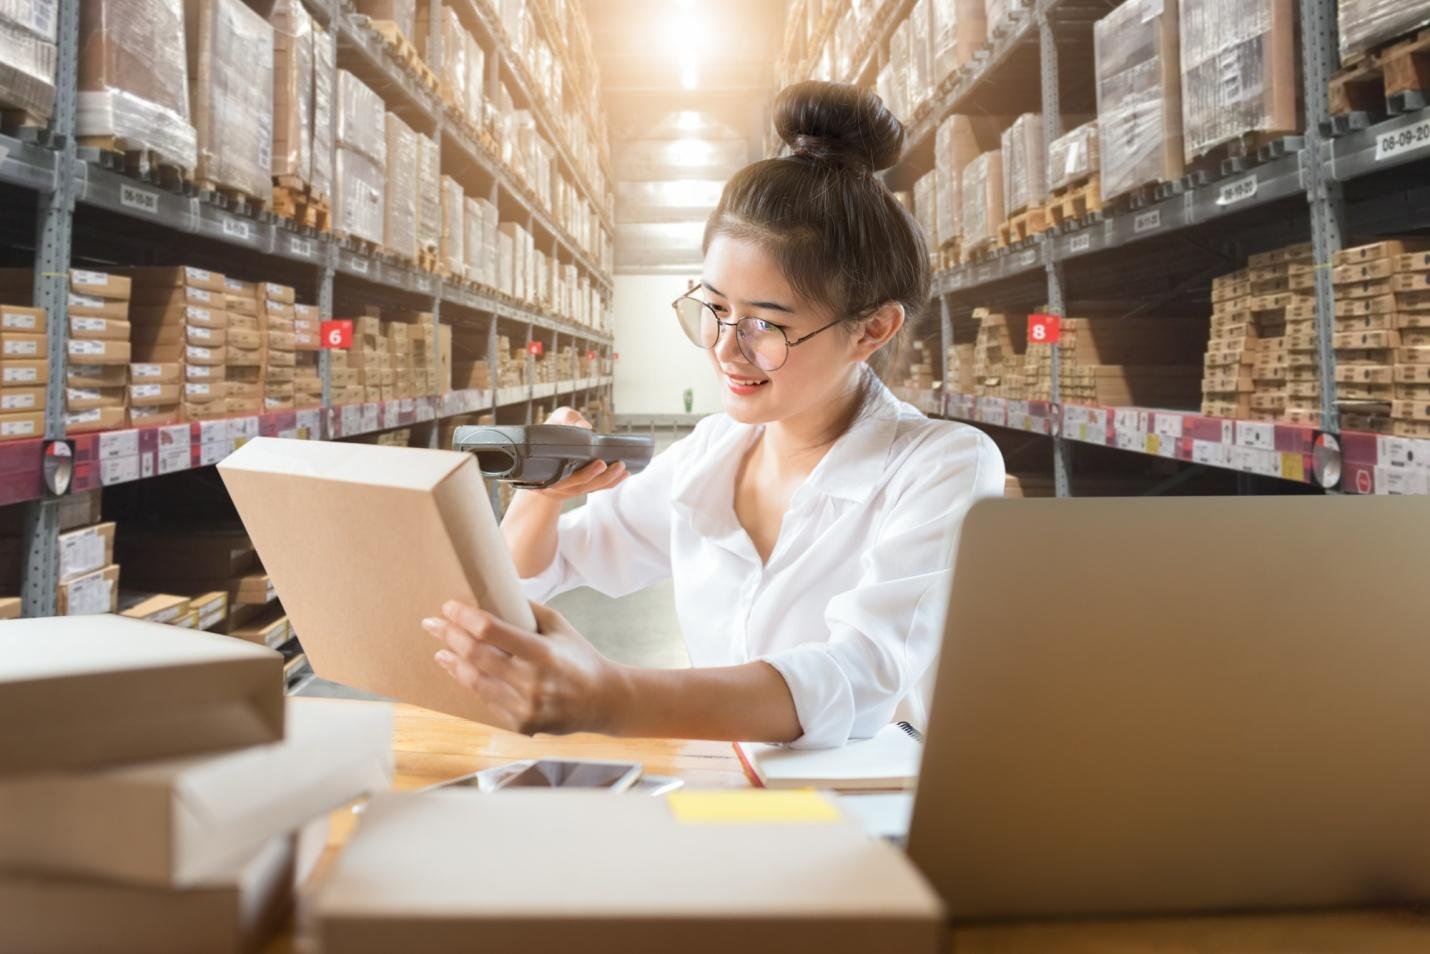 5 Pro Tips for Tracking Inventory